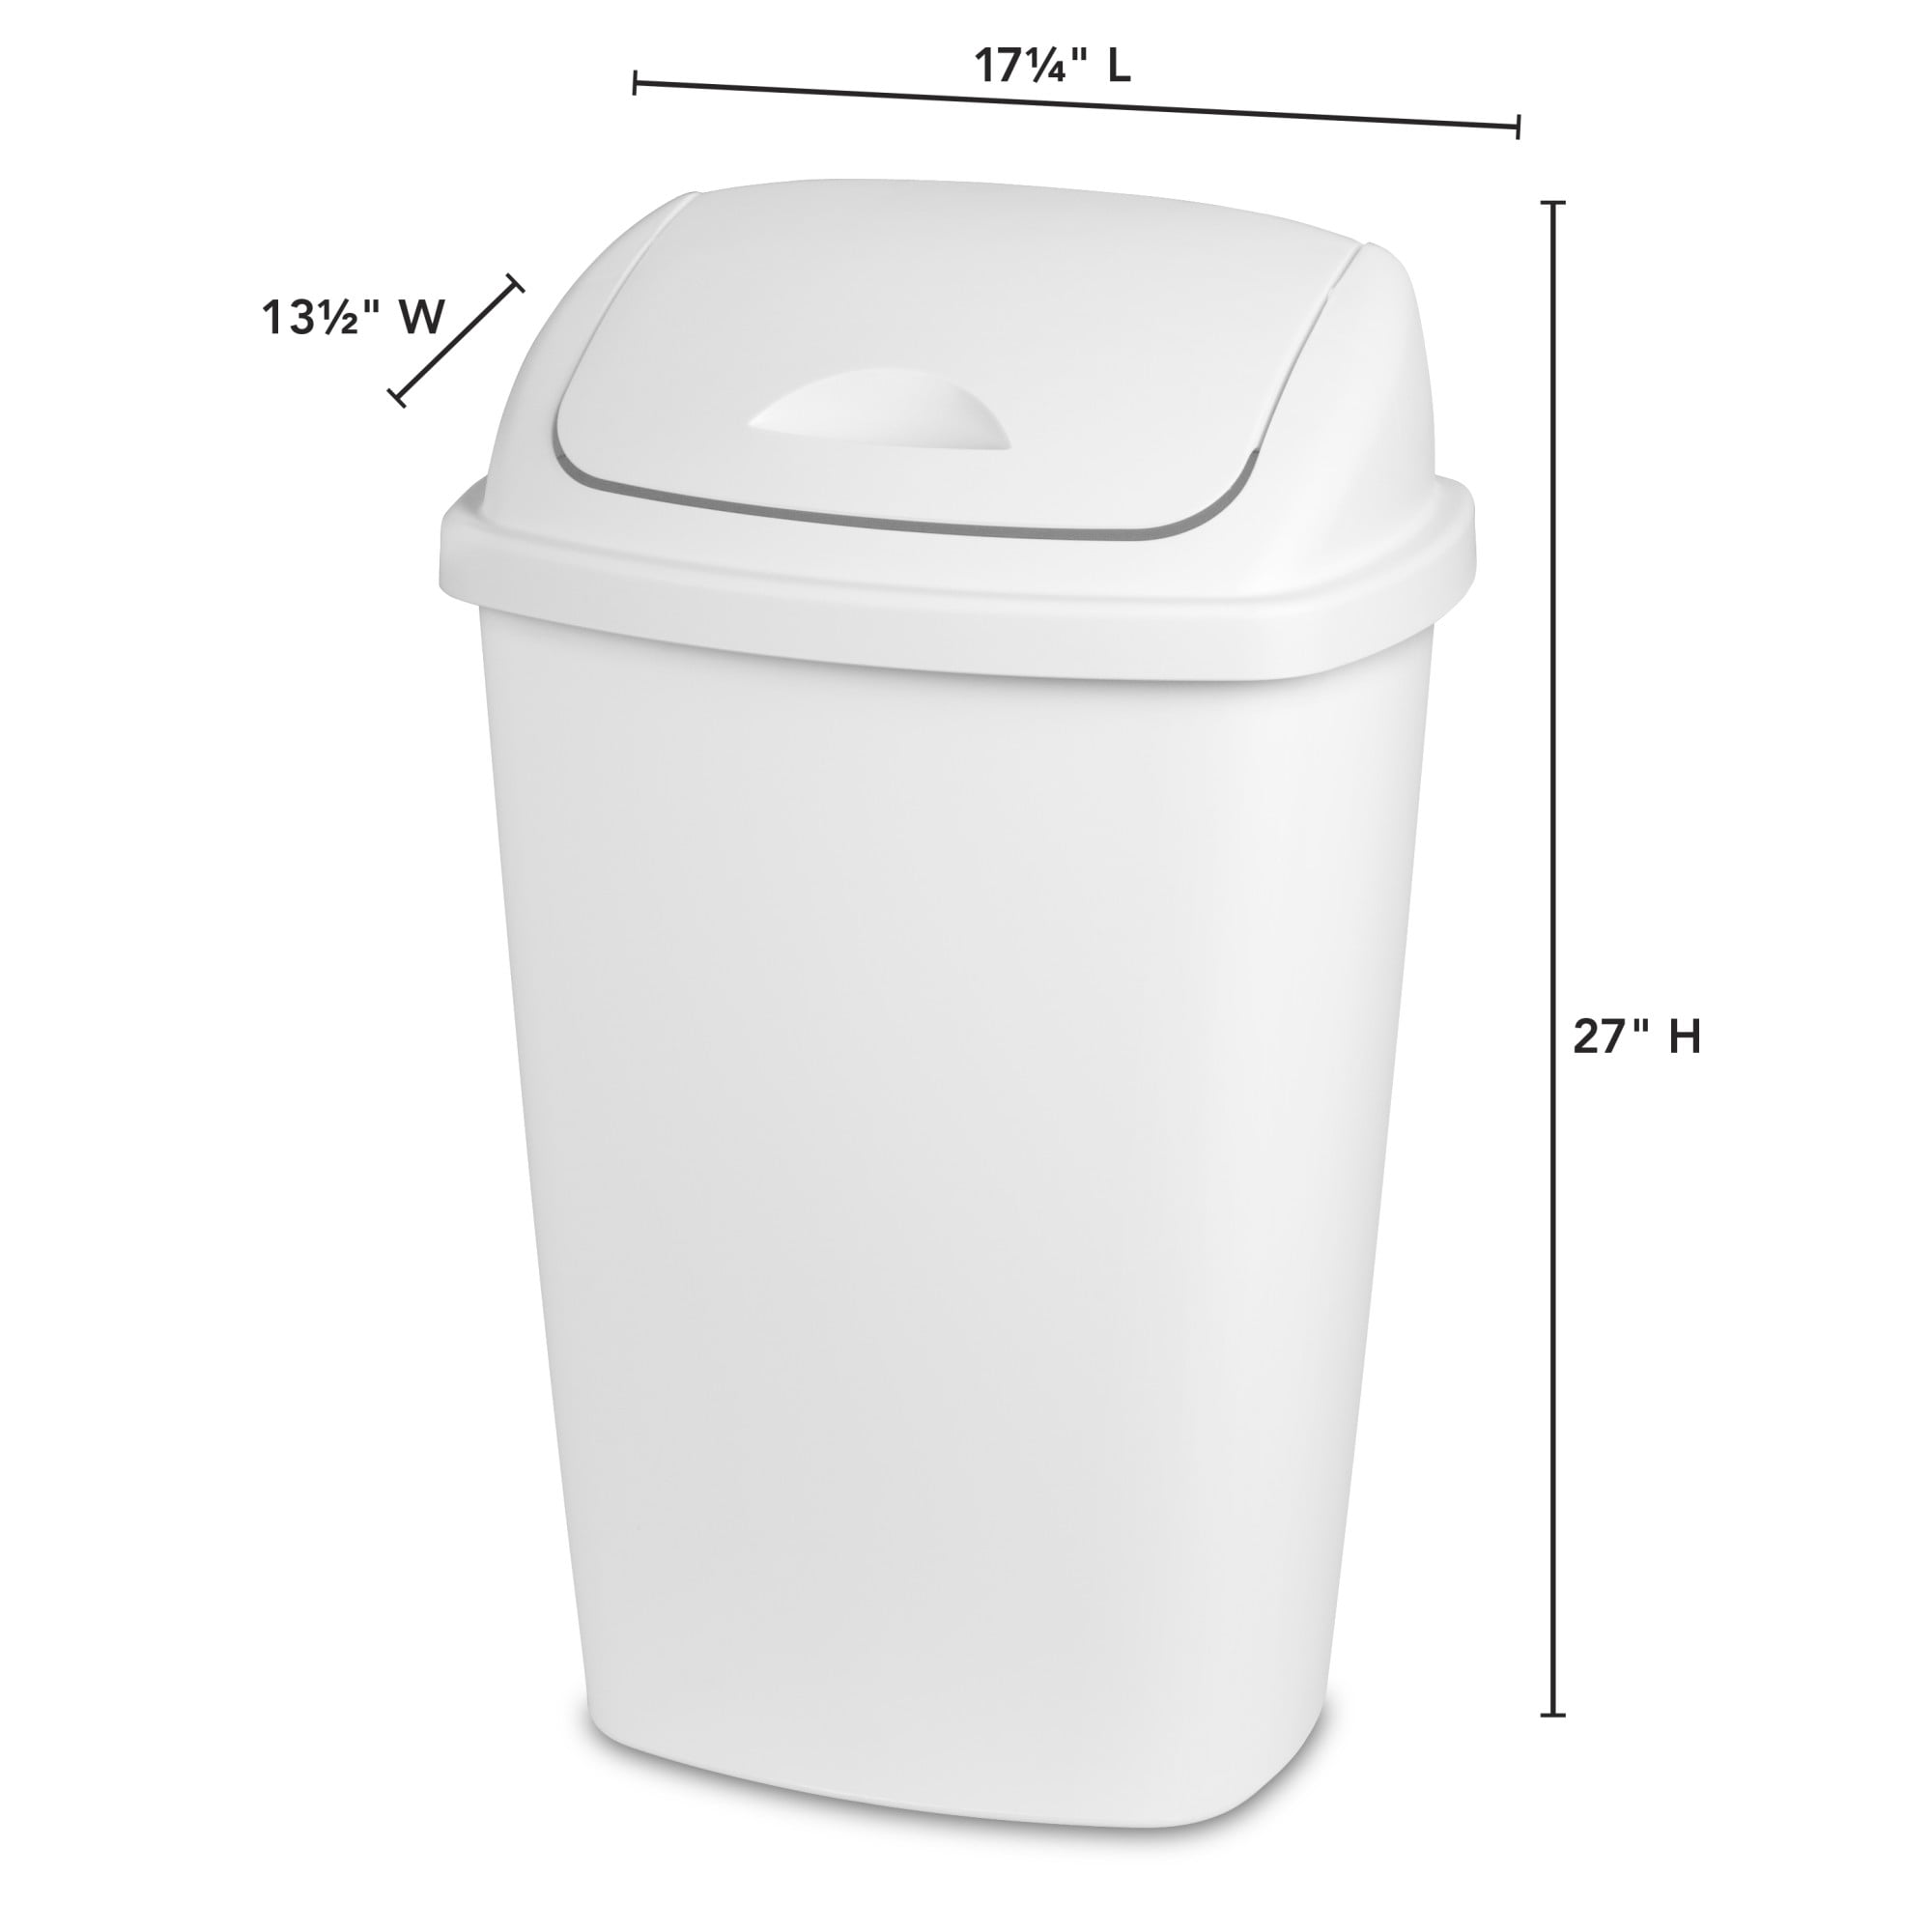 Swing Top Trash Can - White (4 Pack) 2.5 Gal, 9 Gal, 13 Gal – Superio